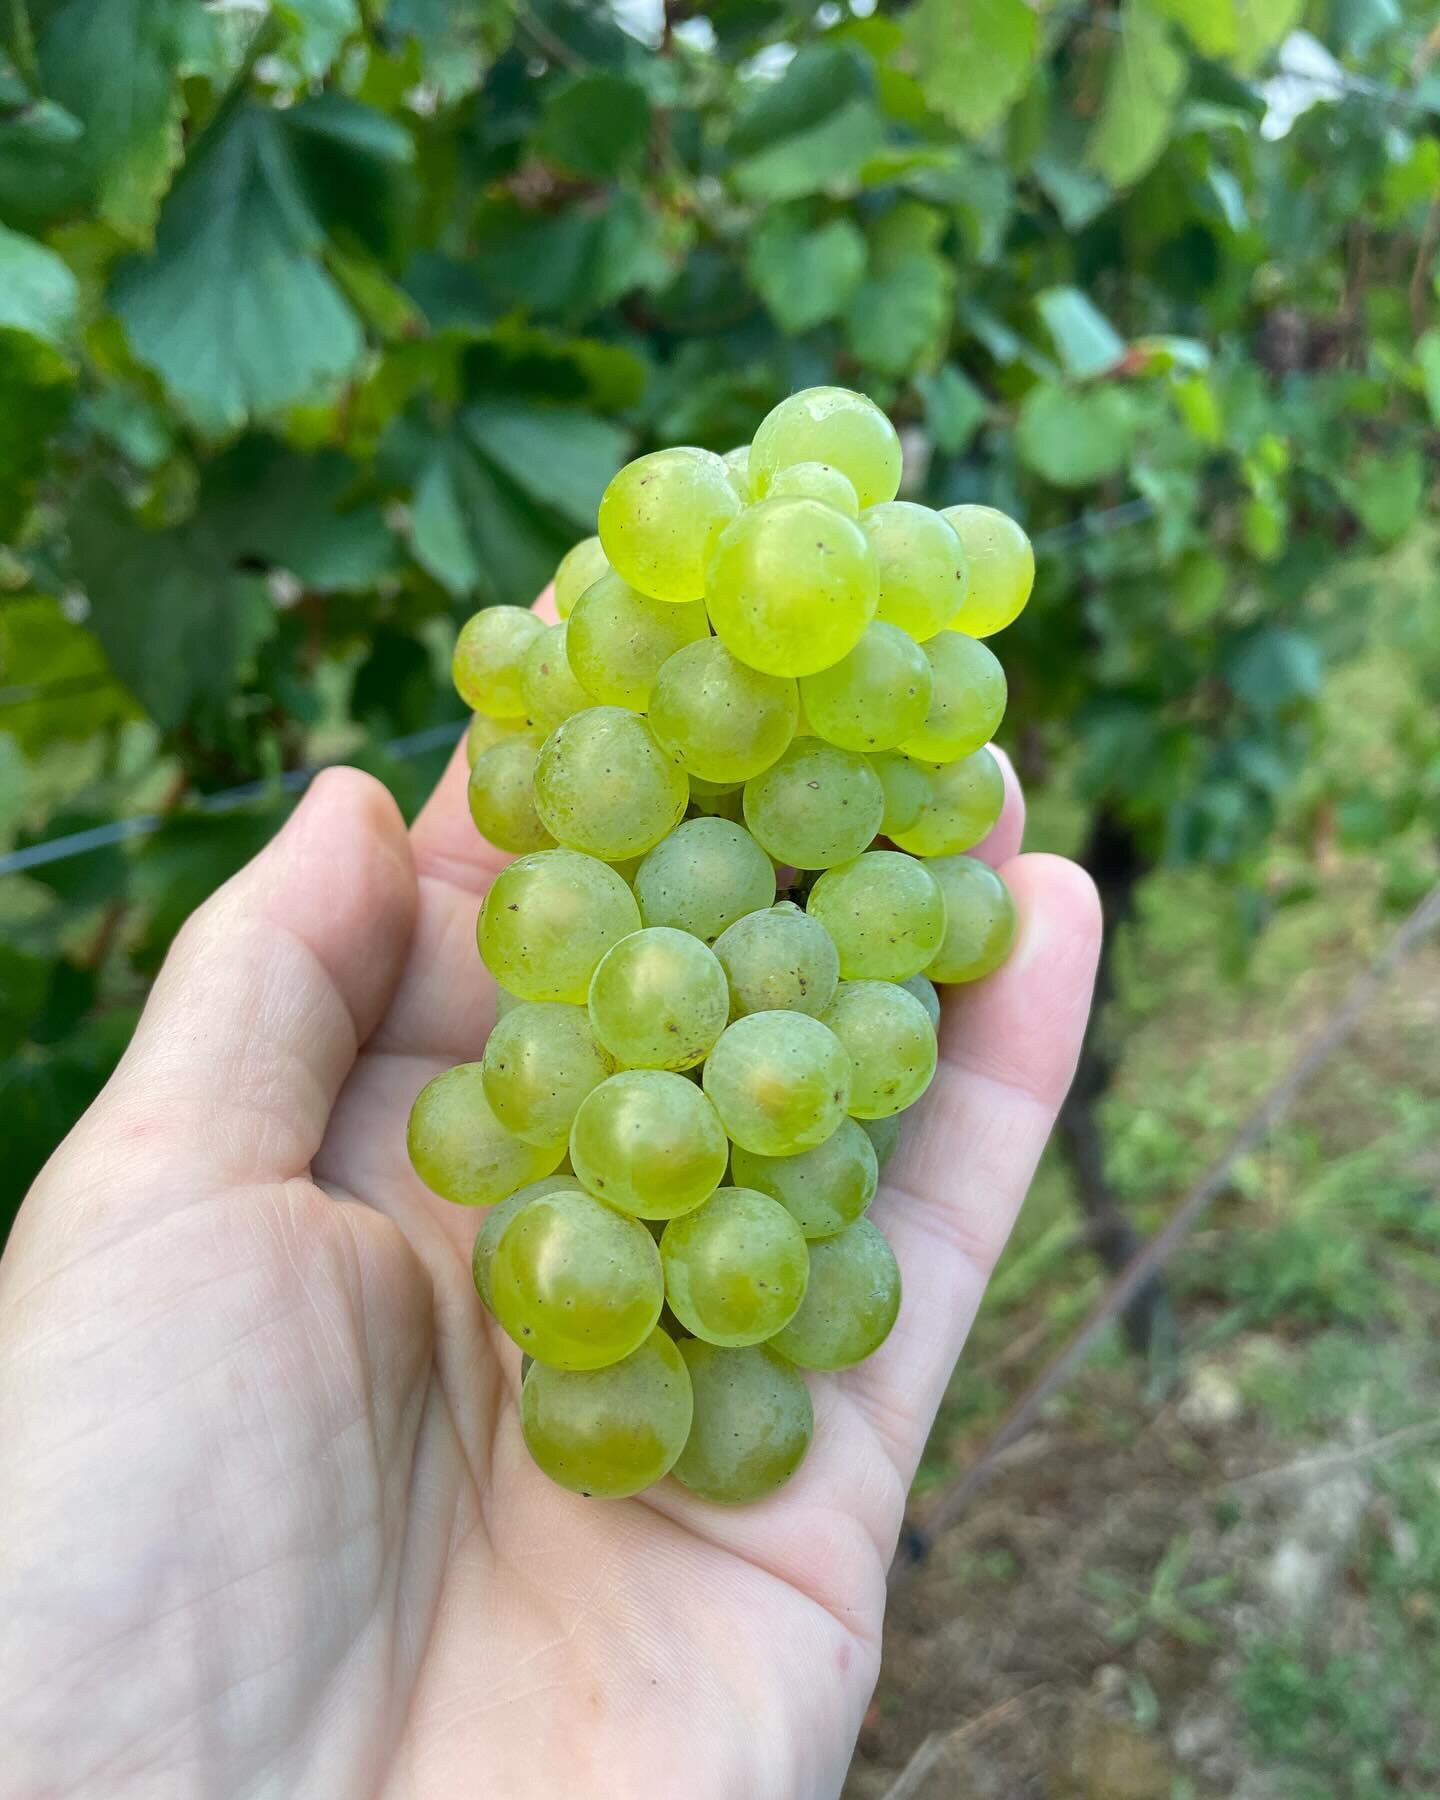 Beautiful bunches of Yarra Valley Chardonnay and Pinot Noir from the Jumping Creek vineyard that I&rsquo;m now managing. Fruit looking amazing and can&rsquo;t wait to see what the wine looks like 🤩🤩

#yarravalley #wine #yarravalleywine #chardonnay 